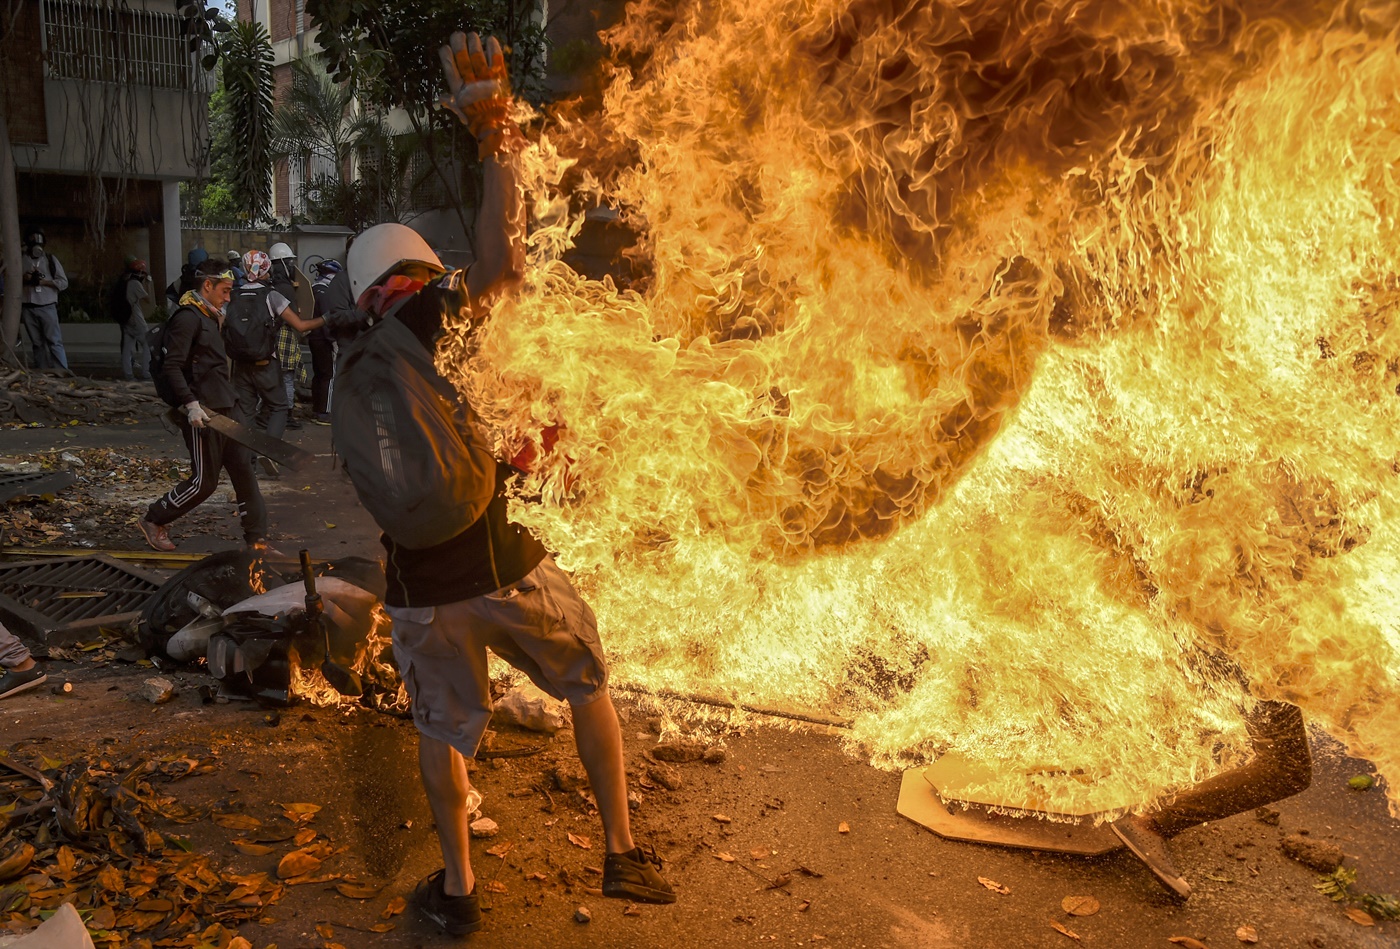 A man tries to help a fellow demonstrator who catched fire, after the gas tank of a police motorbike exploded, during clashes in a protest against Venezuelan President Nicolas Maduro, in Caracas on May 3, 2017. Venezuela's angry opposition rallied Wednesday vowing huge street protests against President Nicolas Maduro's plan to rewrite the constitution and accusing him of dodging elections to cling to power despite deadly unrest. / AFP PHOTO / JUAN BARRETO